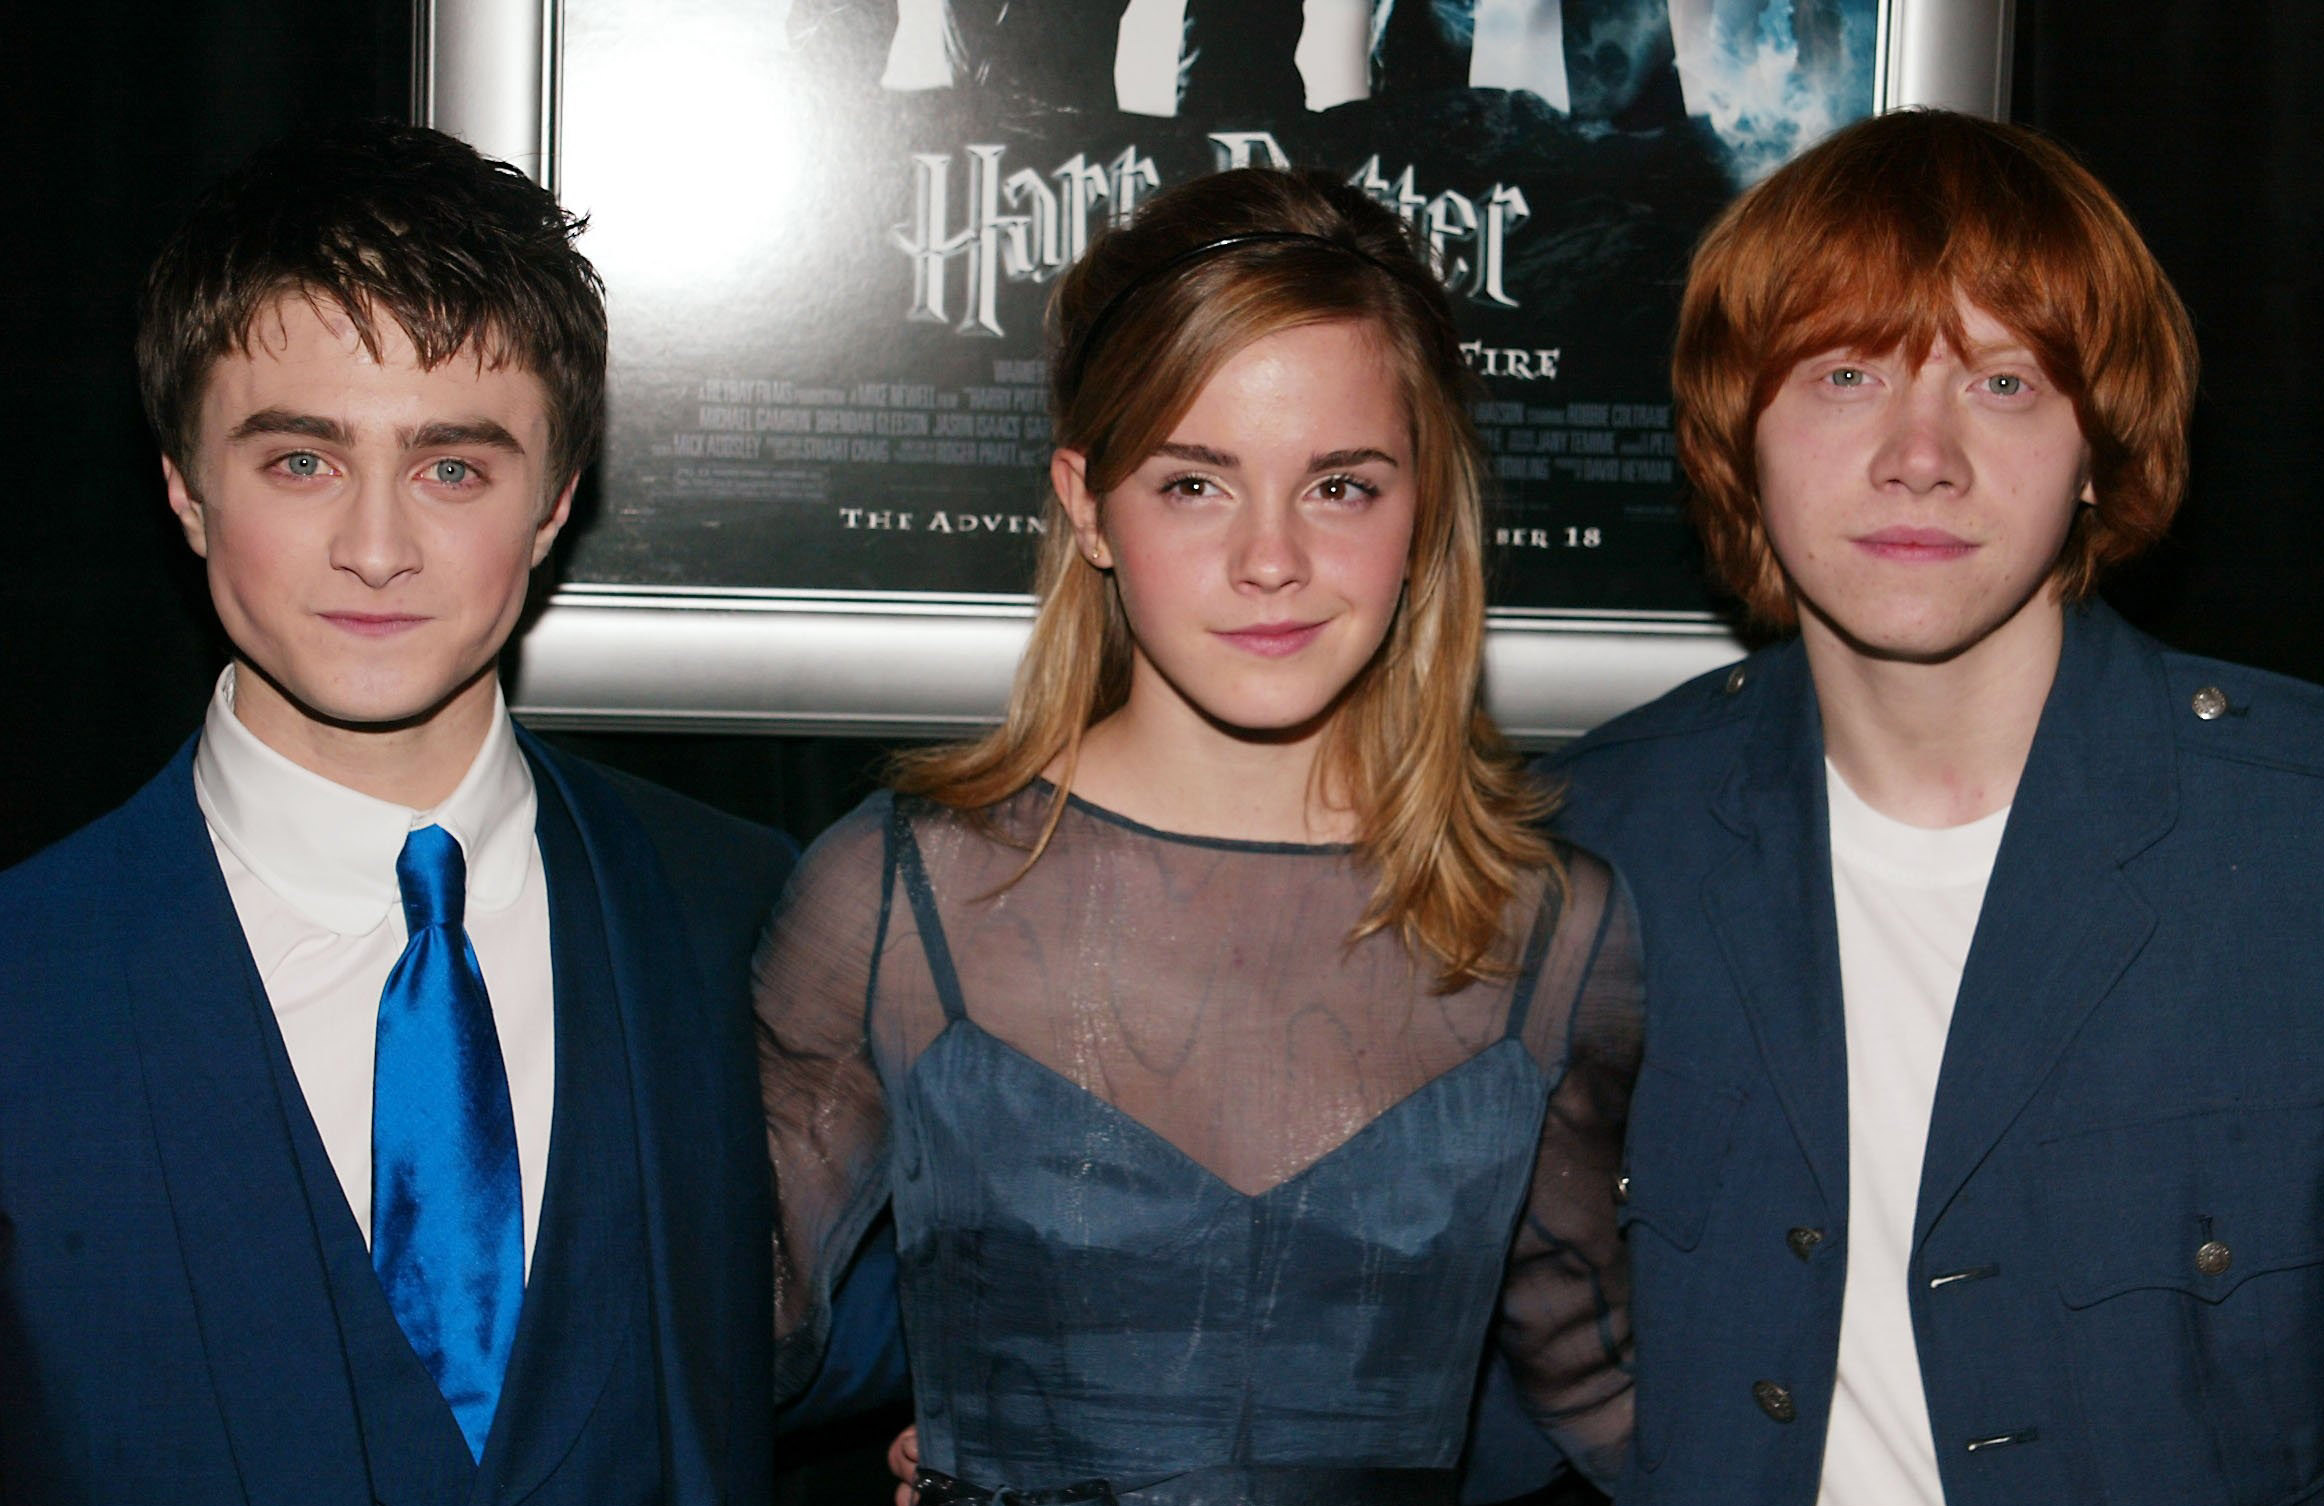 Daniel Radcliffe, Emma Watson, and Rupert Grint at the premiere of "Harry Potter and the Goblet of Fire" in New York City on November 12, 2005 | Source: Getty Images